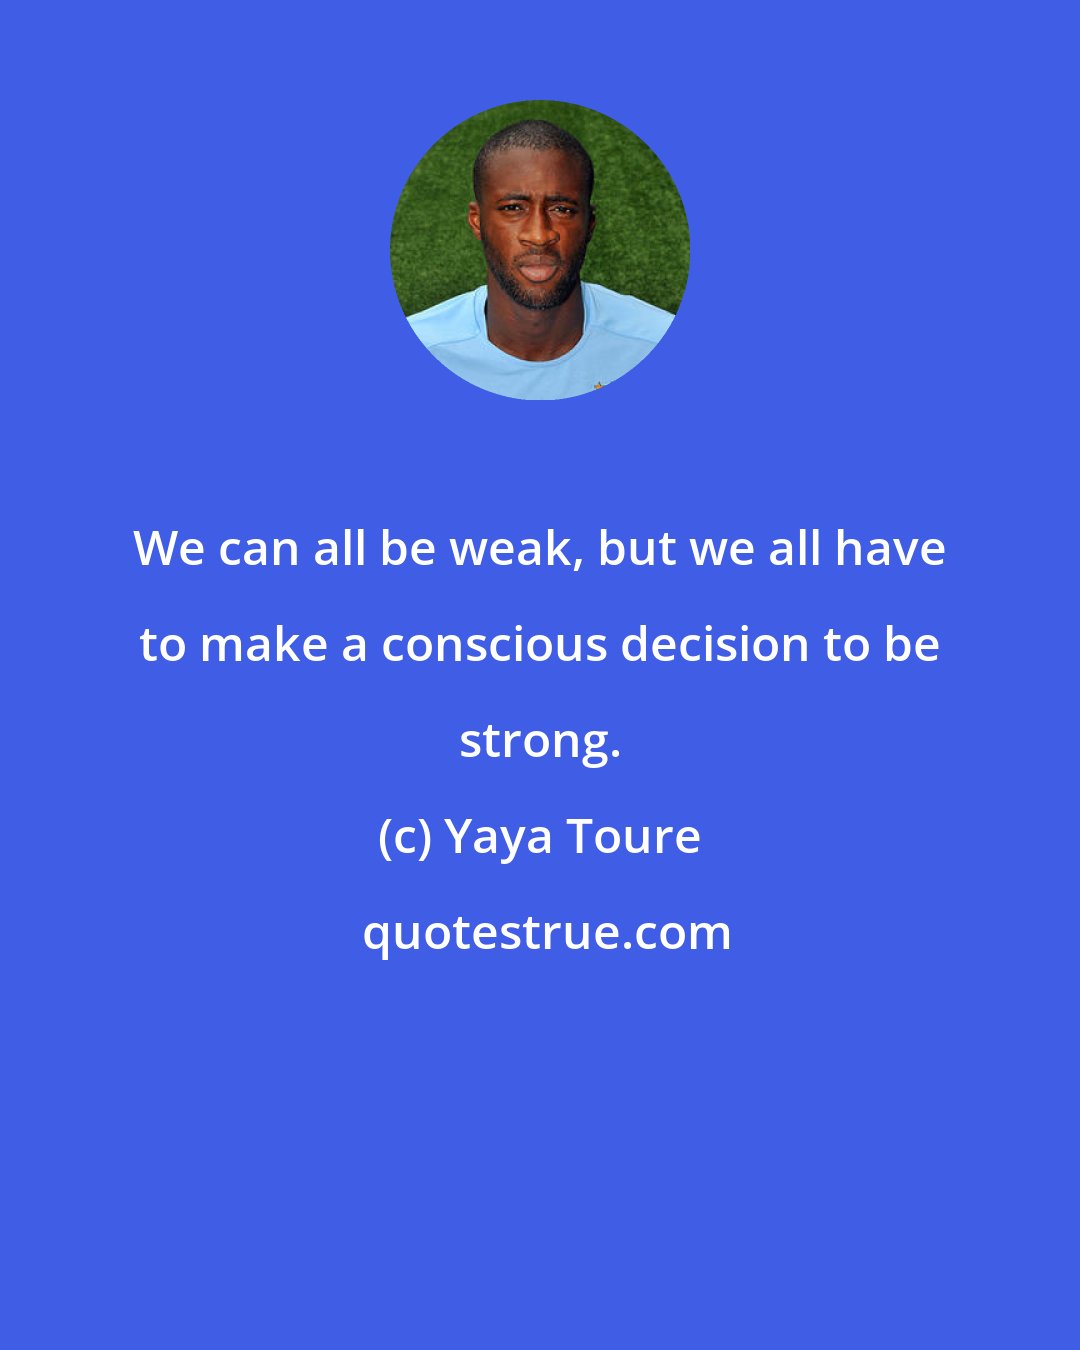 Yaya Toure: We can all be weak, but we all have to make a conscious decision to be strong.